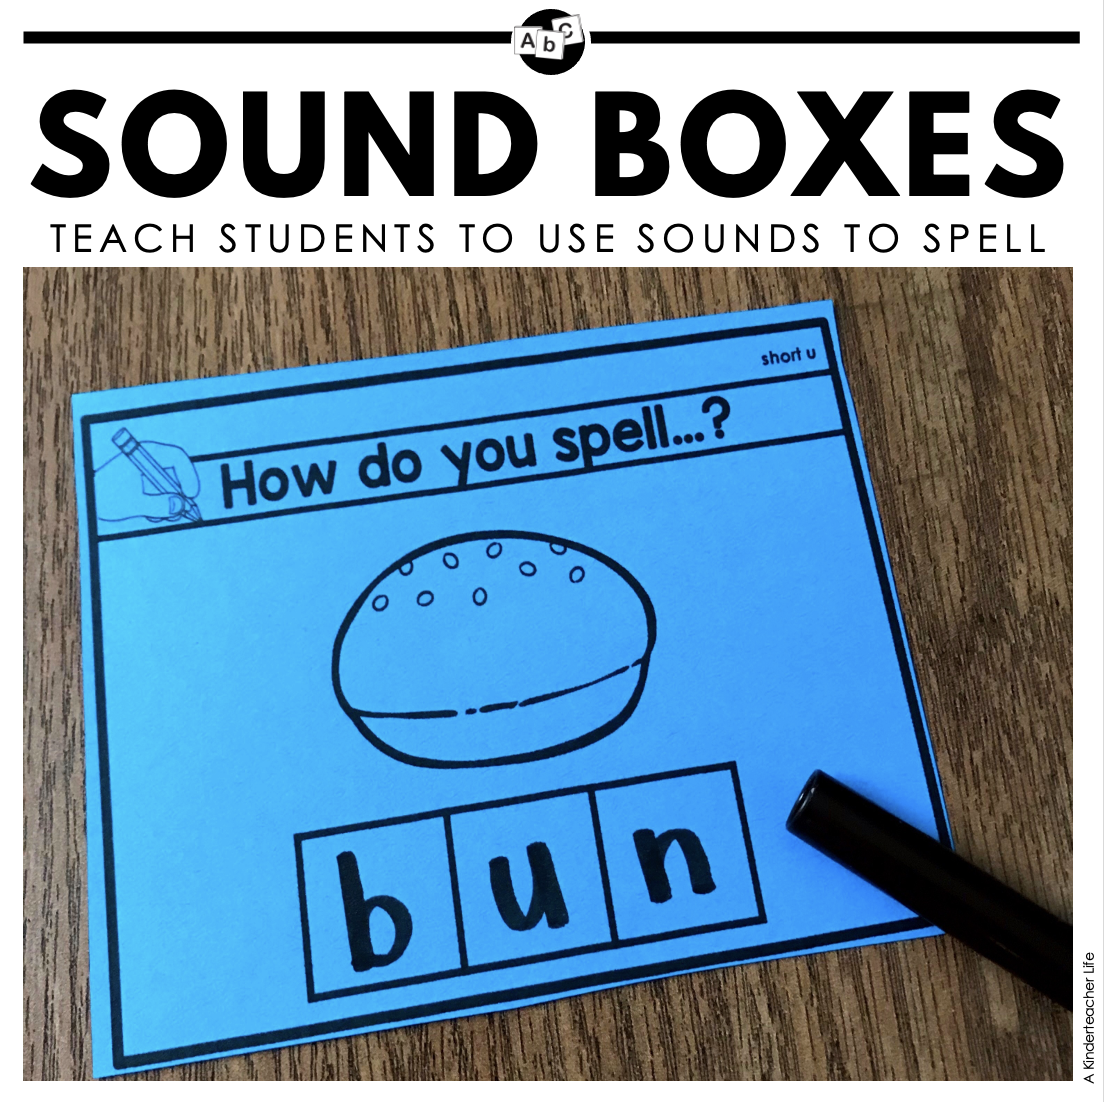 HOW TO USE Sound Boxes